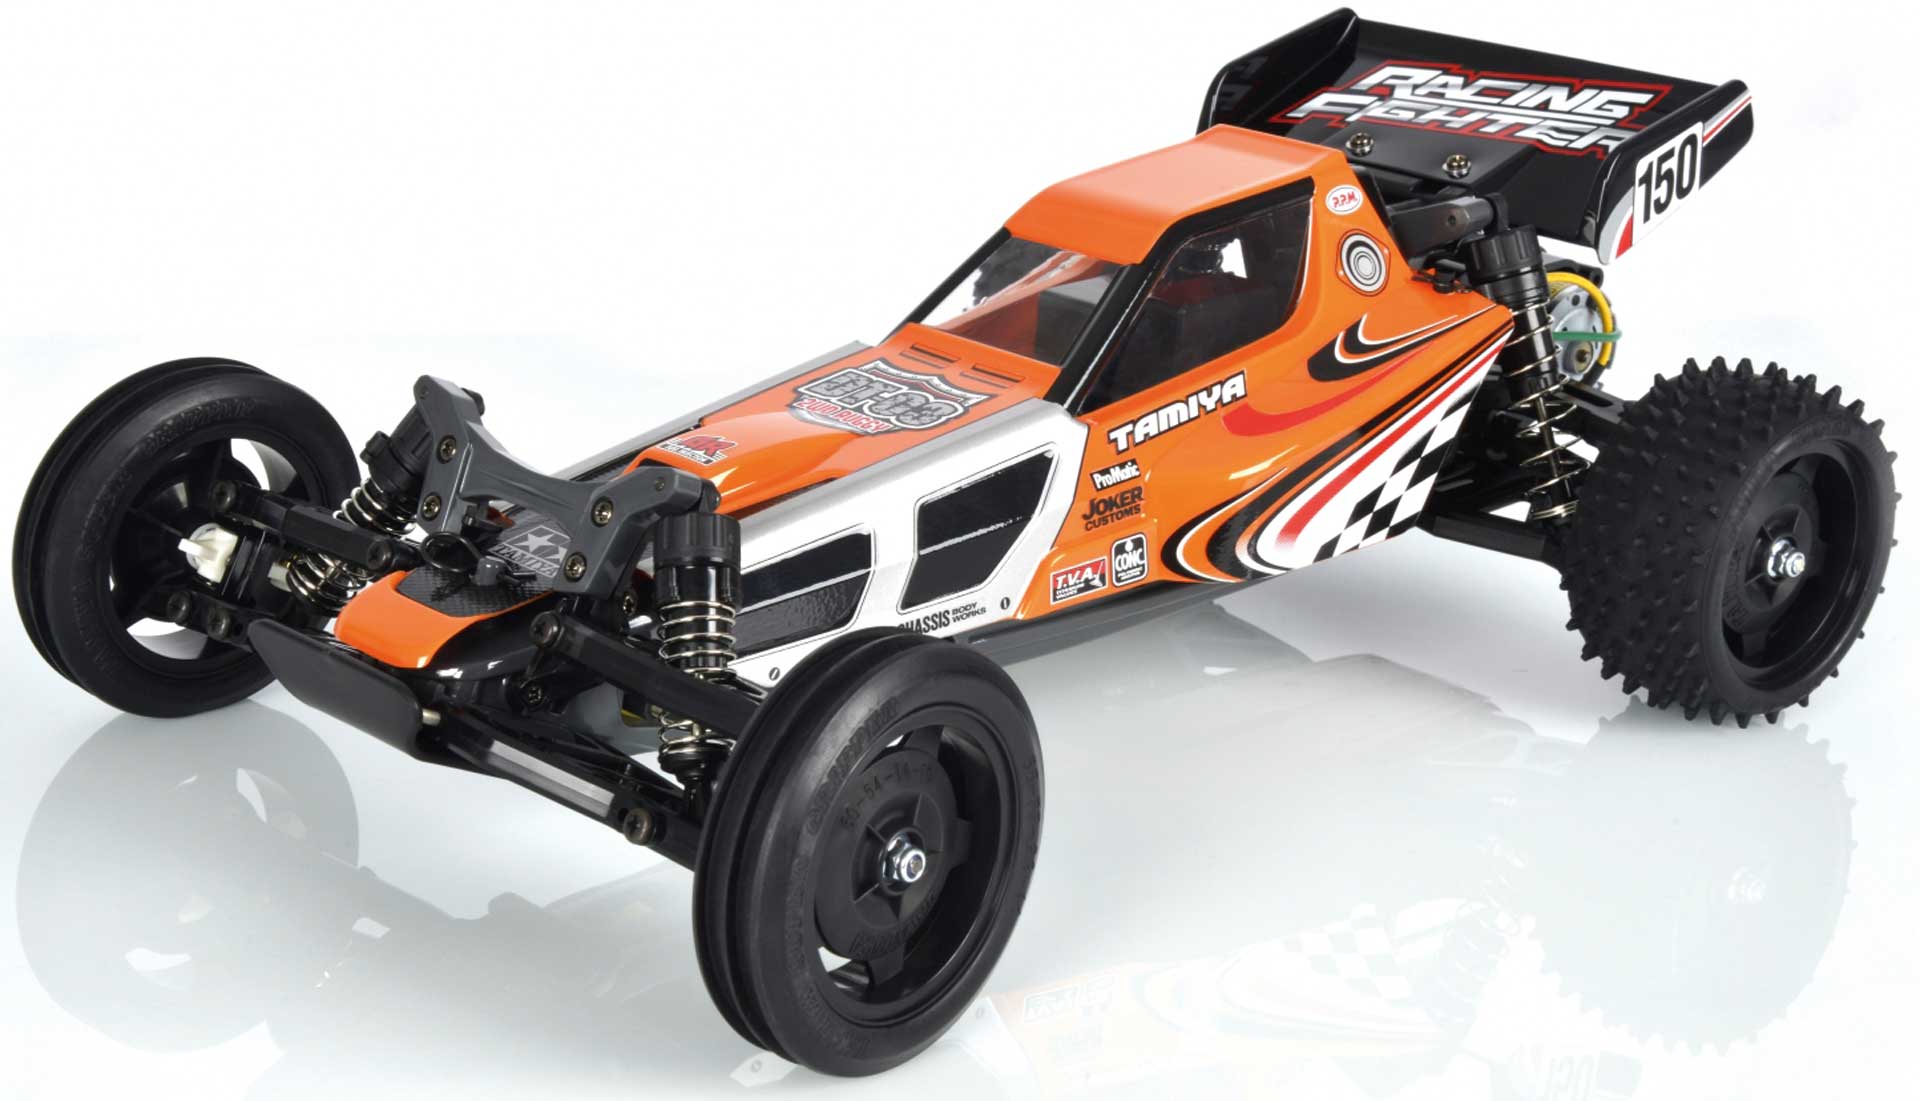 TAMIYA RACING FIGHTER DT-03 THE REAL KIT